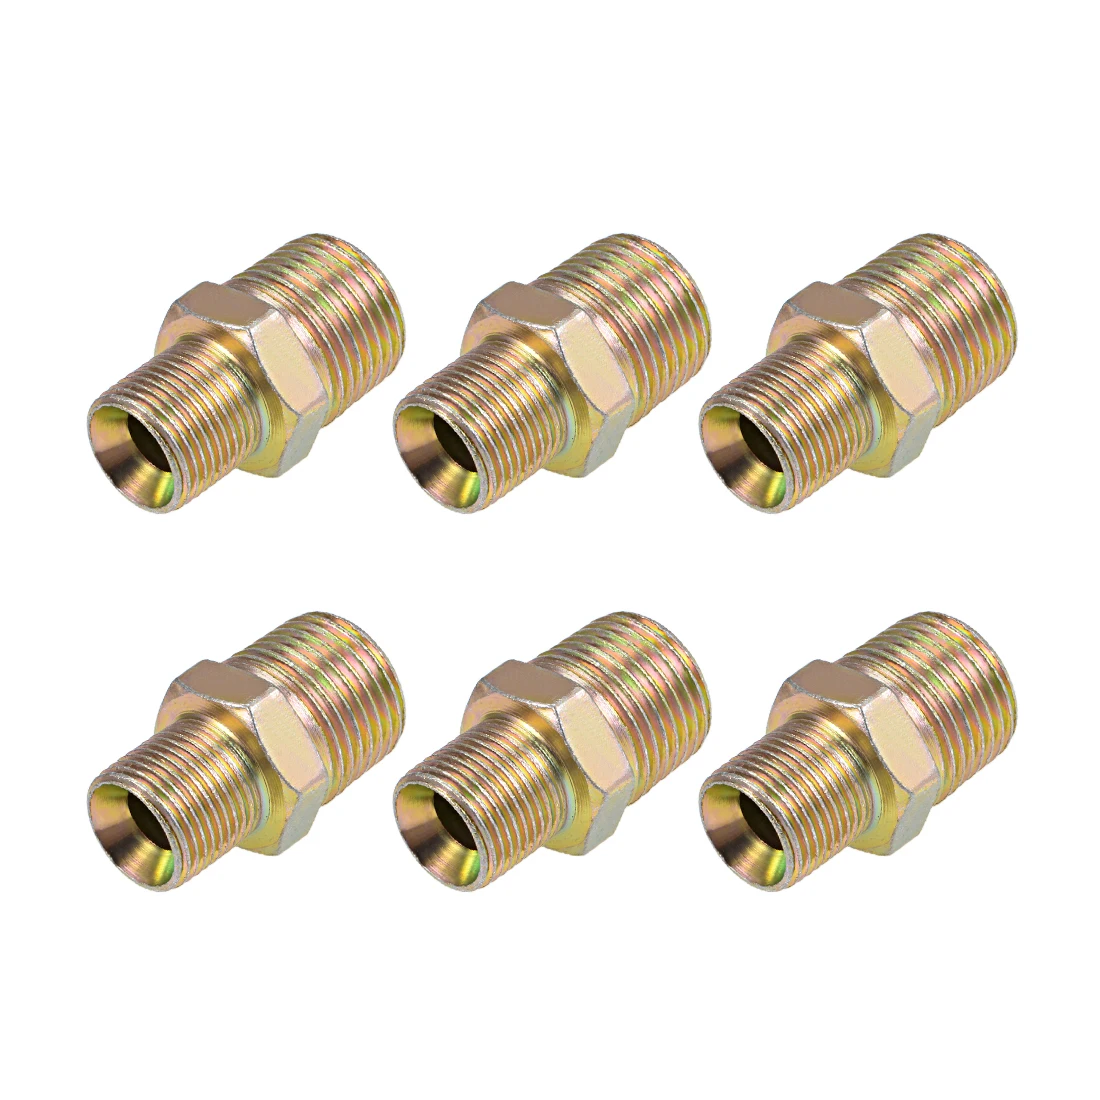 

uxcell Reducing Pipe Fitting - Reducer Hex Nipple - 1/2 X 3/8 BSP Male Connector Zinc Finish Plating 6Pcs